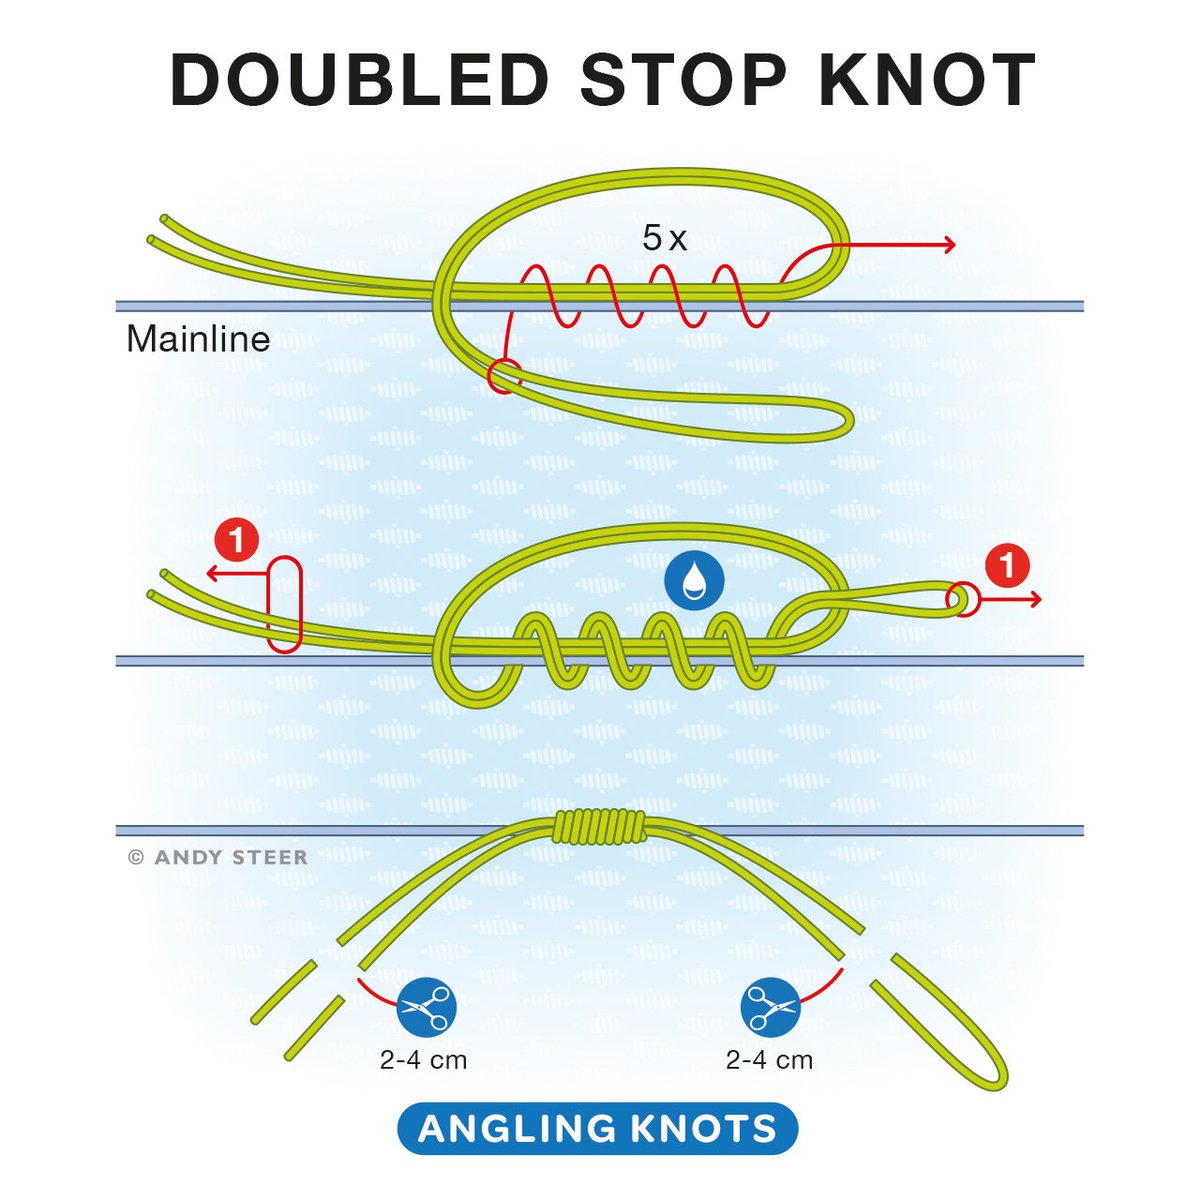 The Doubled Stop Knot
Check out the step-by-step video: youtu.be/D4MDFcVtjAU
#coarsefishing #lurefishing #flyfishing #carpfishing #bassfishing #seafishing  #boatfishing #rockfishing #lakefishing #riverfishing #catchandrelease #sportfishing #fishing #outdoors #fishaddict